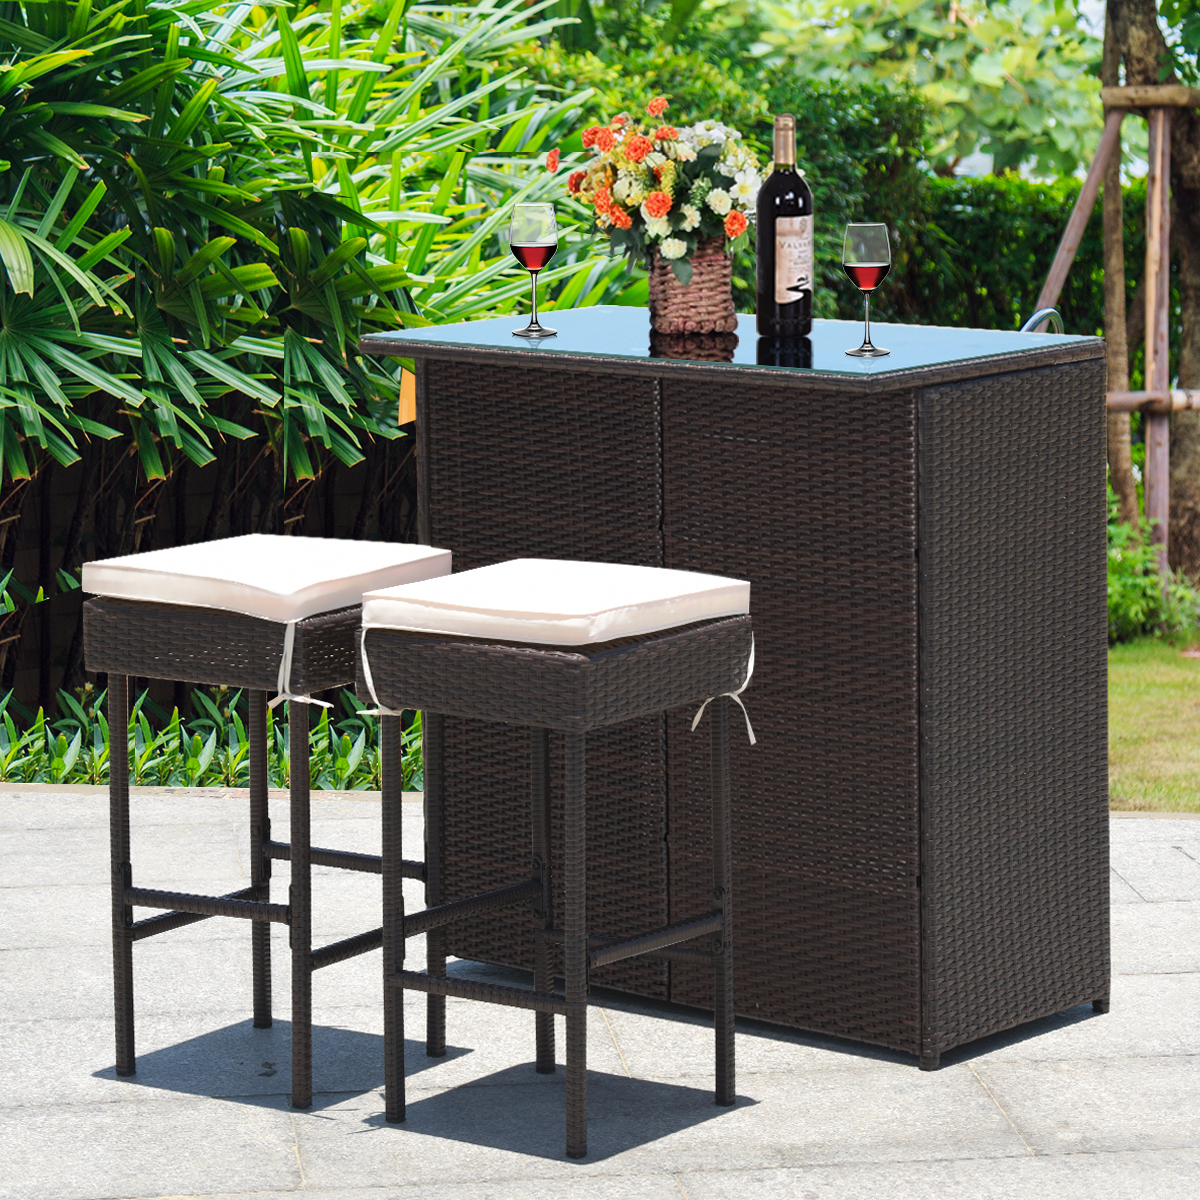 Costway 3PCS Patio Rattan Wicker Bar Table Stools Dining Set Cushioned Chairs Garden - image 3 of 10